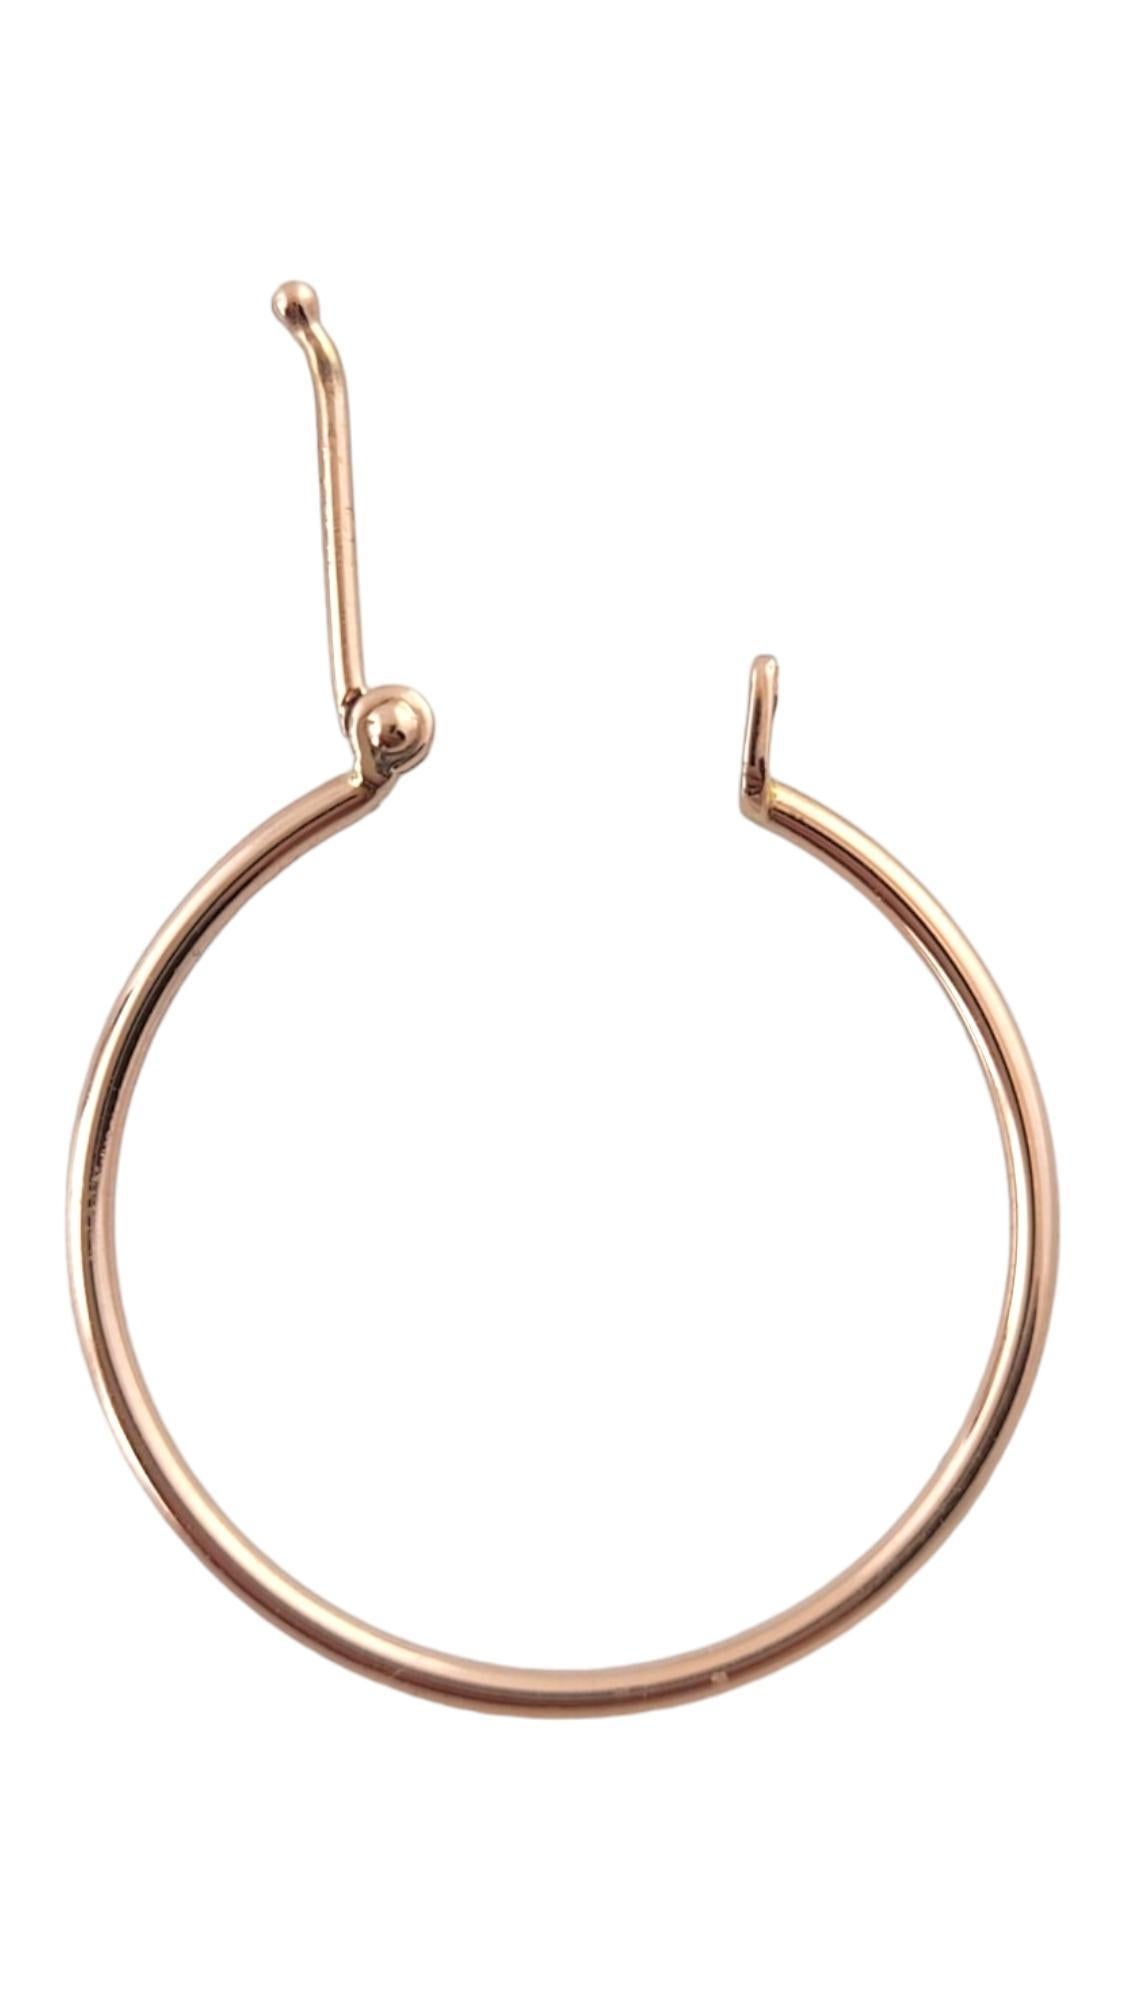 9K Rose Gold Thin Hoop Earrings #17387 In Good Condition For Sale In Washington Depot, CT